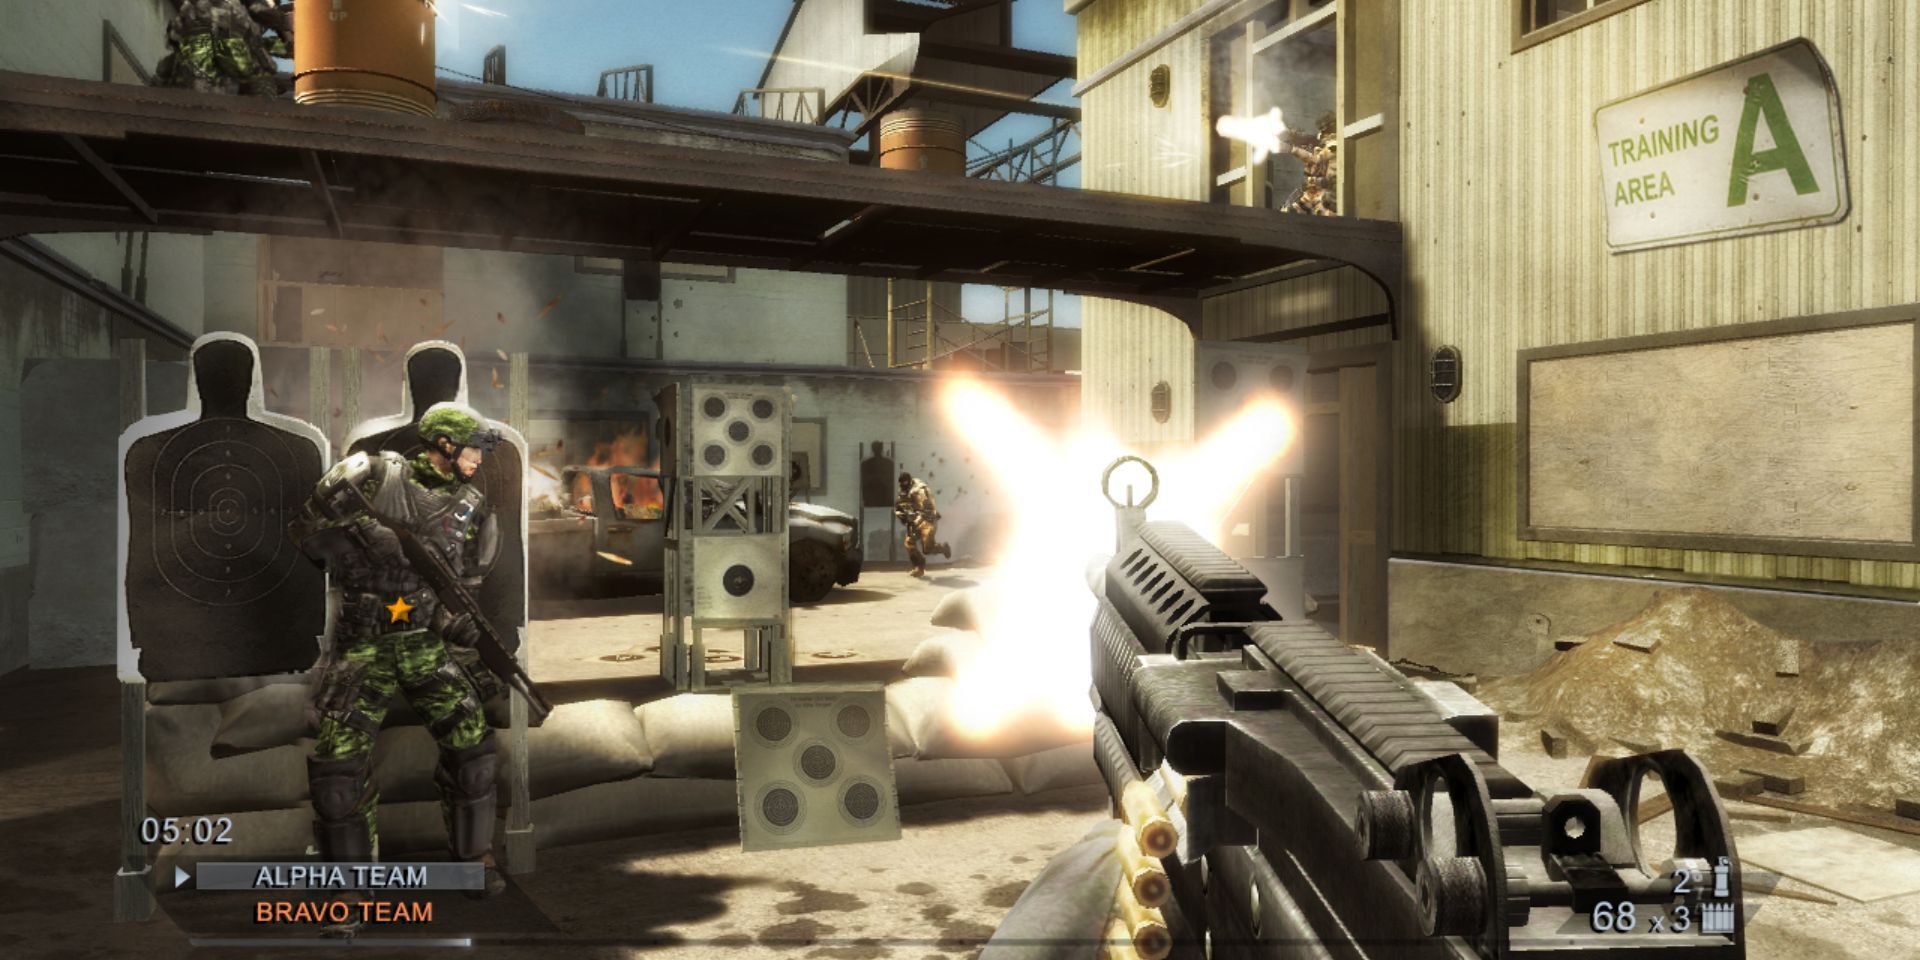 A multiplayer match in Tom Clancy's Rainbow Six Vegas 2